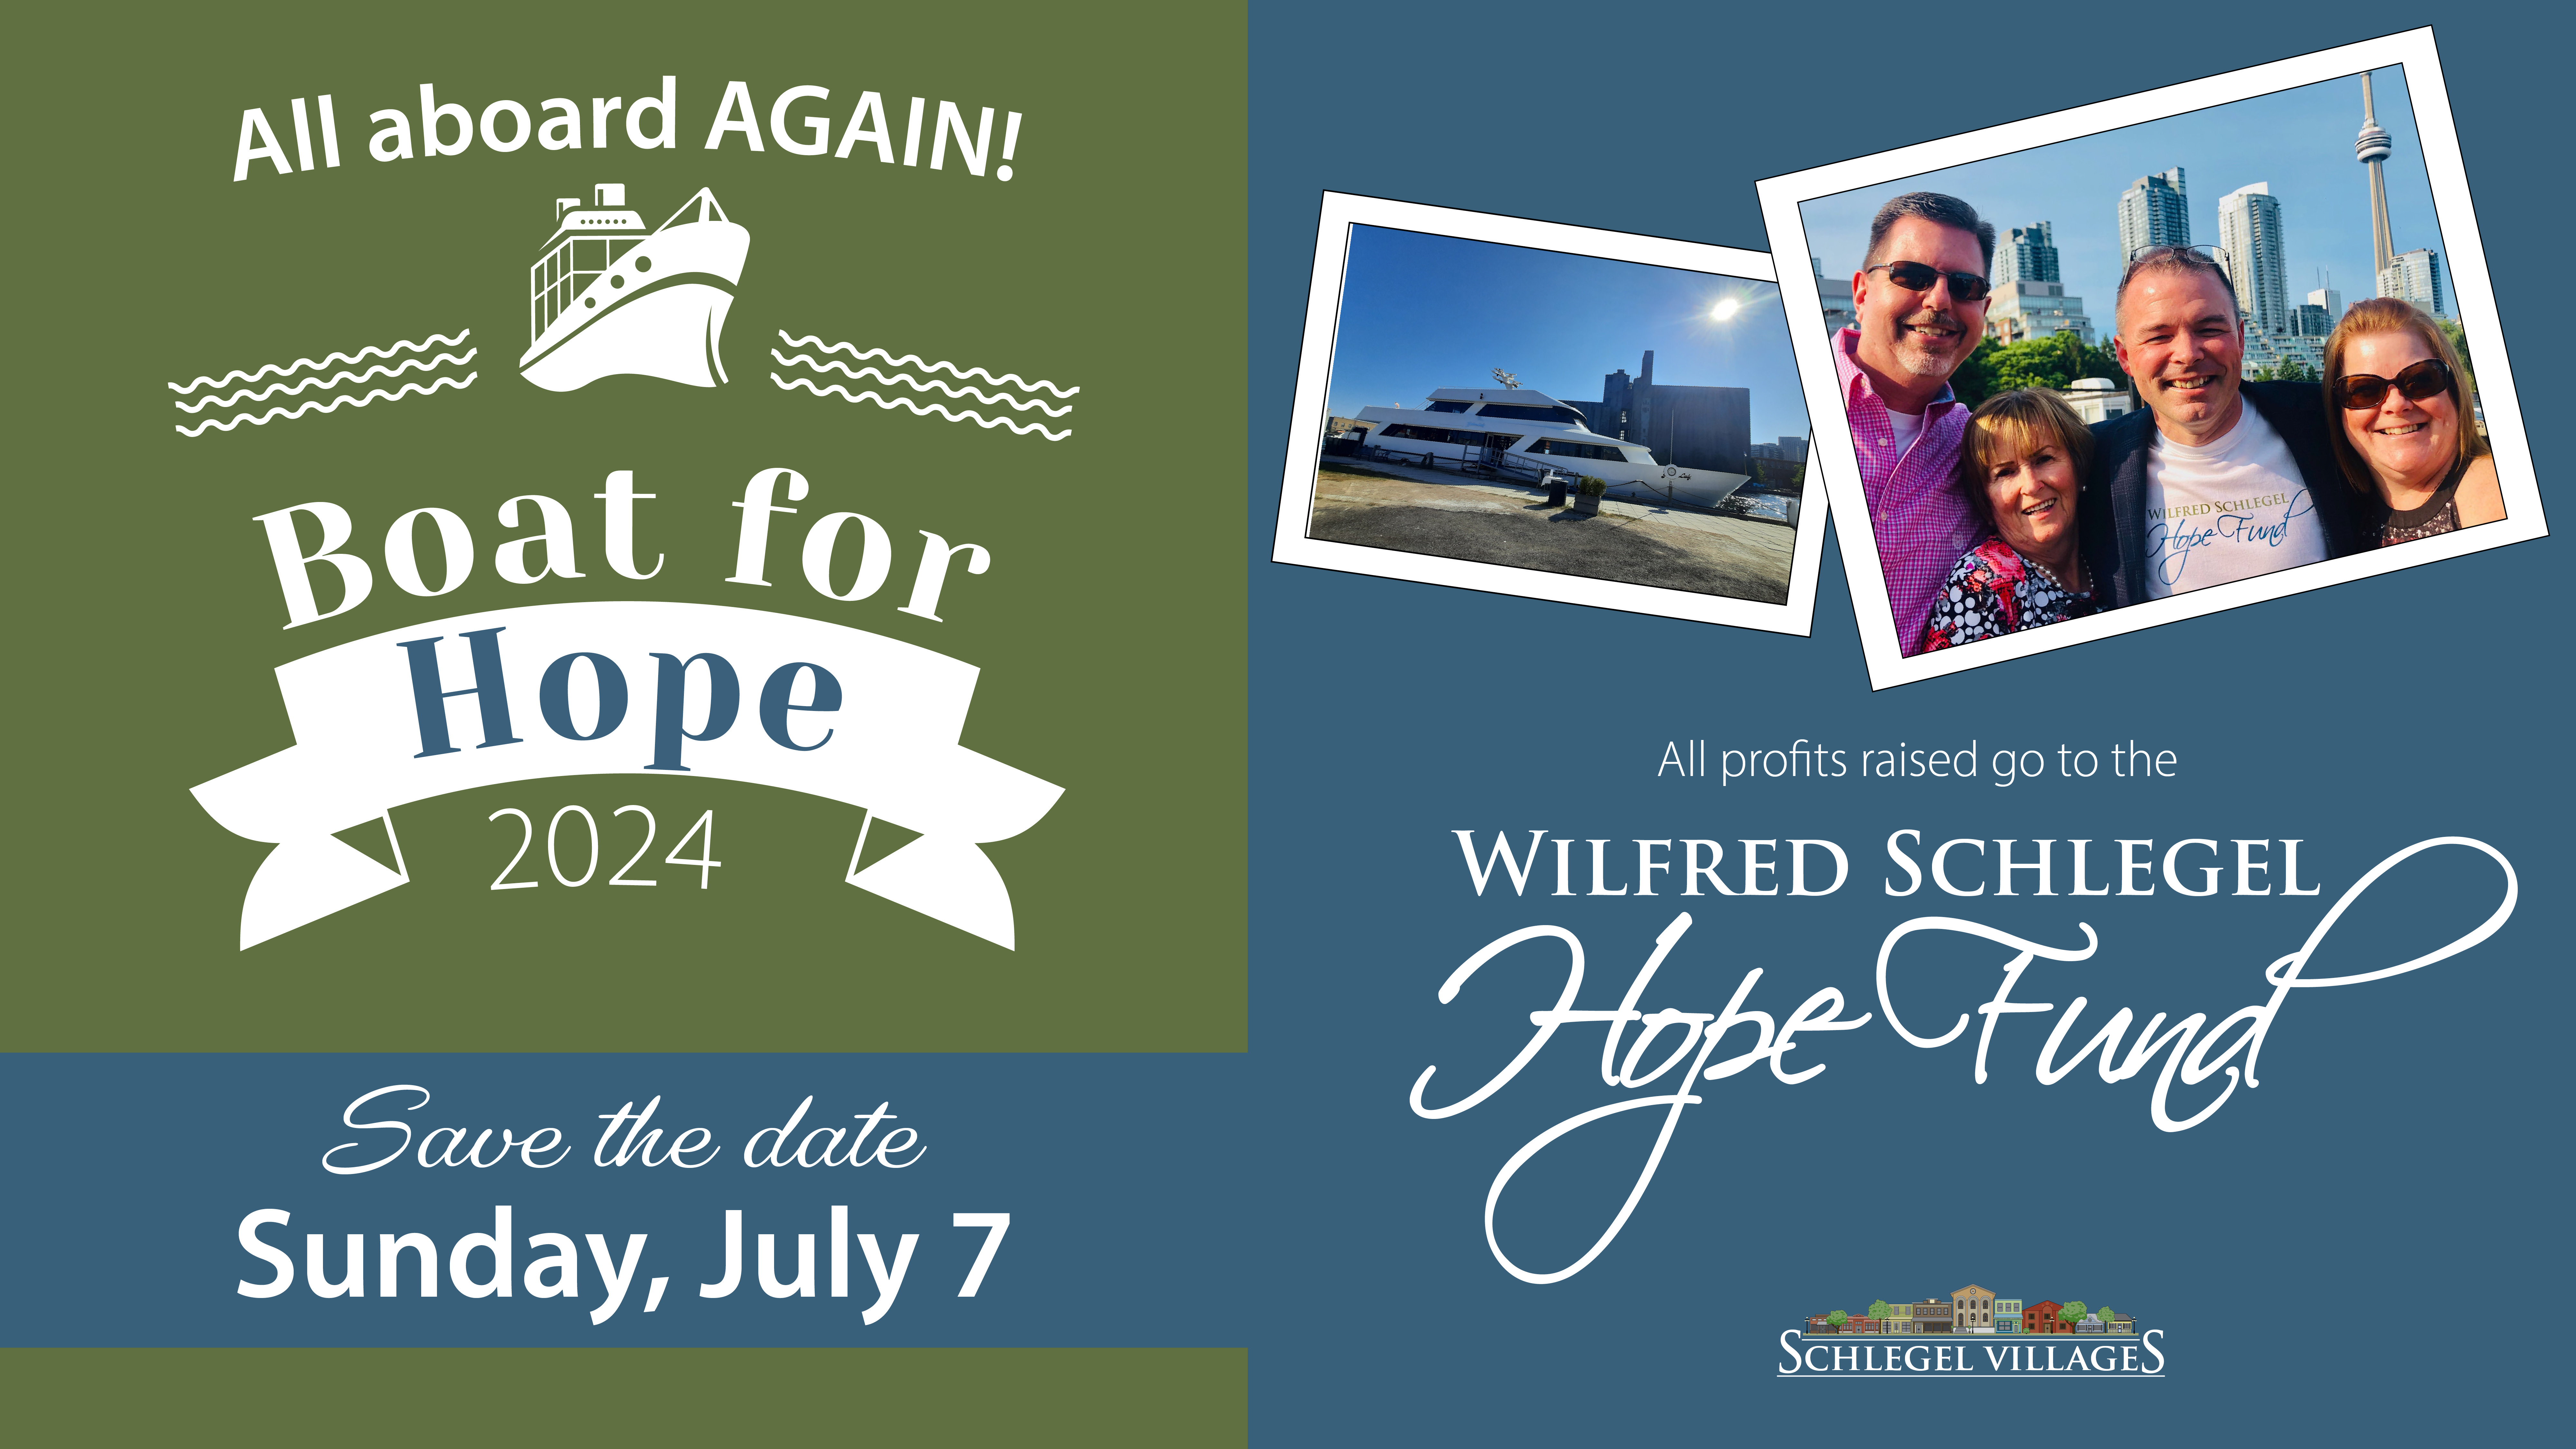 Boat for hope save the date July 7th, 2024